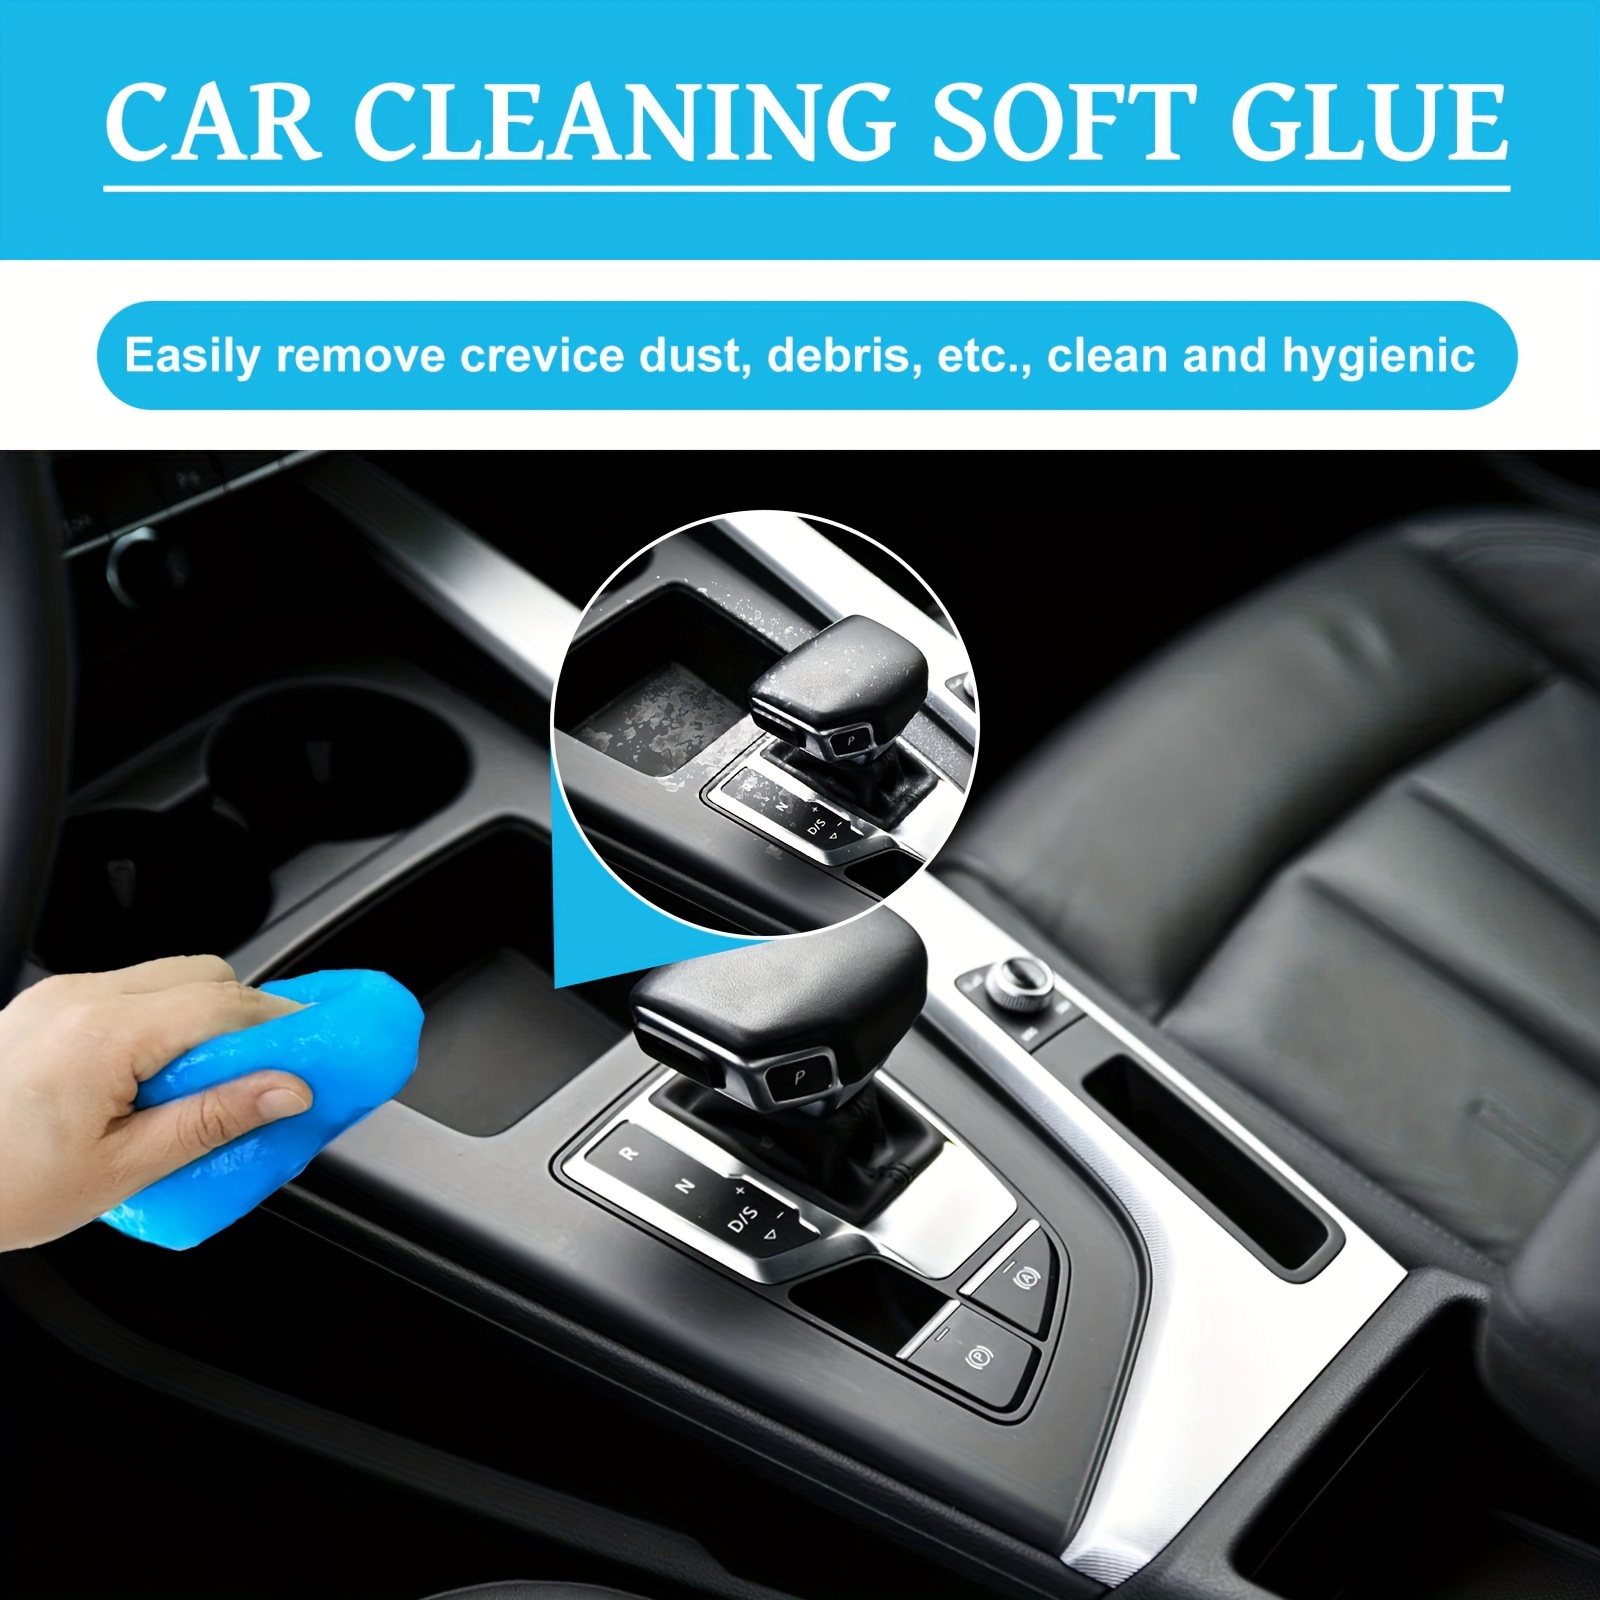 For Car Glue Remover, Glue Removal Pen Clearing Sticky Glue Adhesive  Cleaner Strong Glue Remover Supplies Sticker Glue Removal